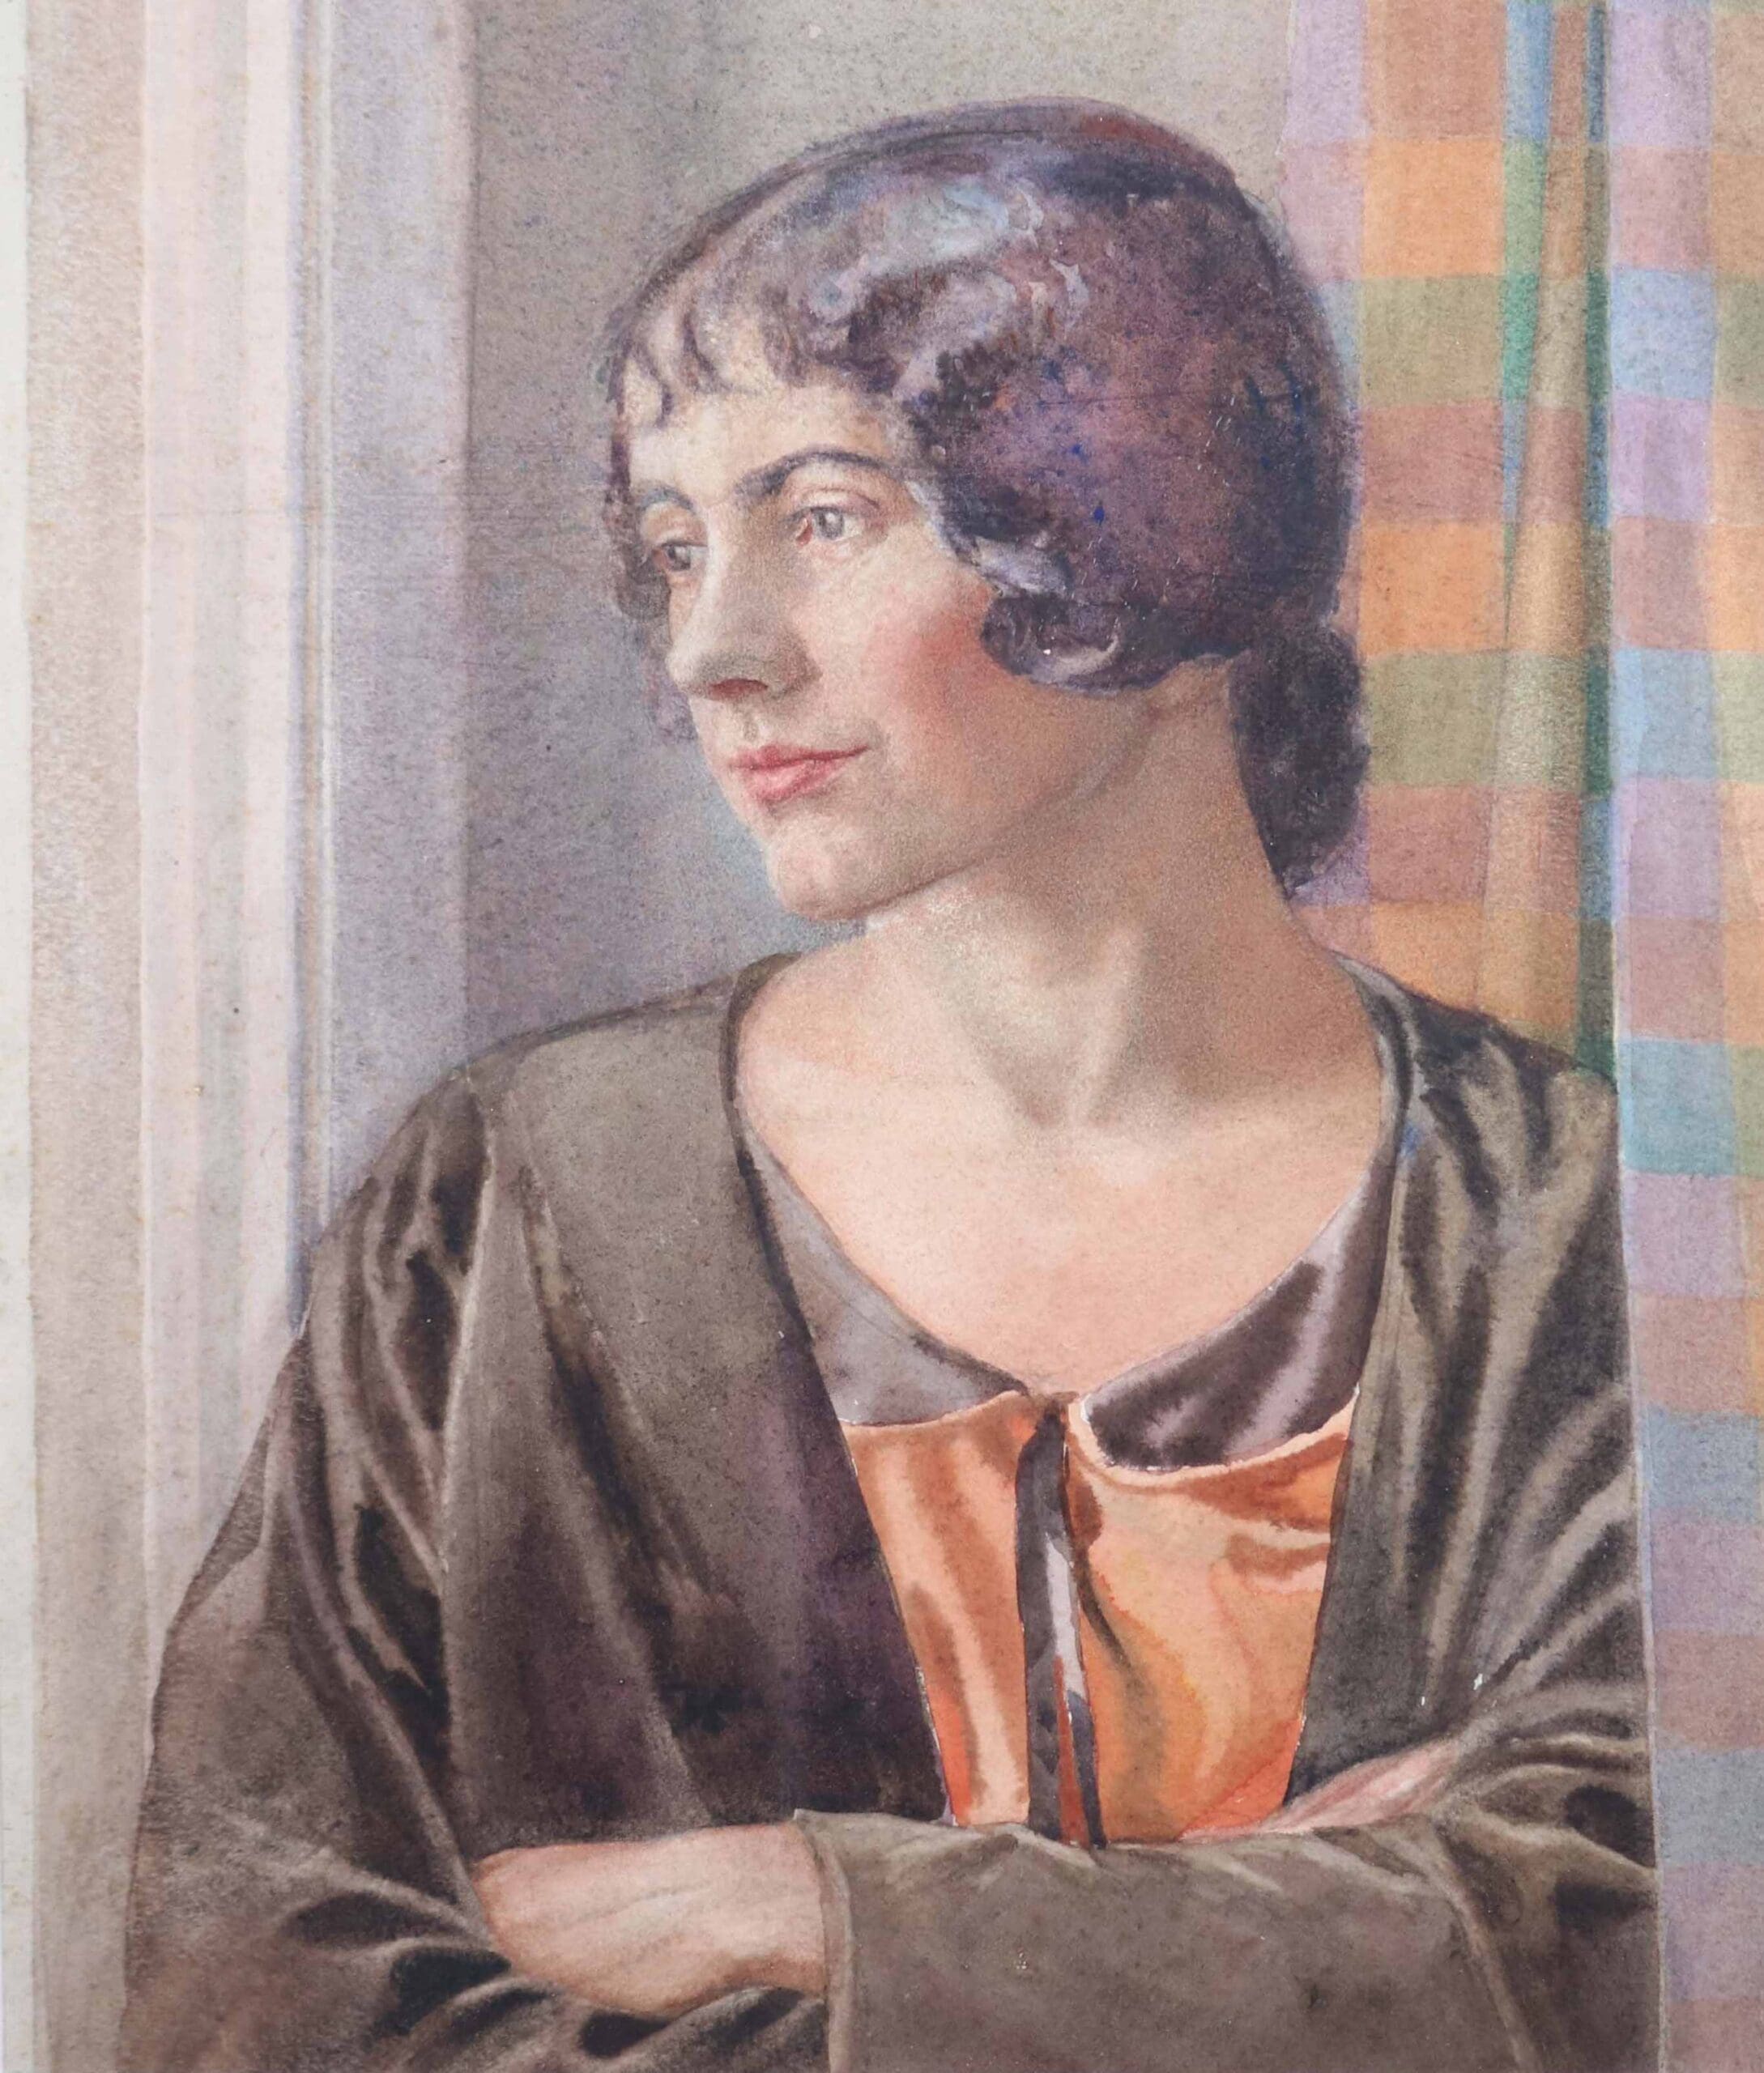 Judith Ackland's watercolour of a woman